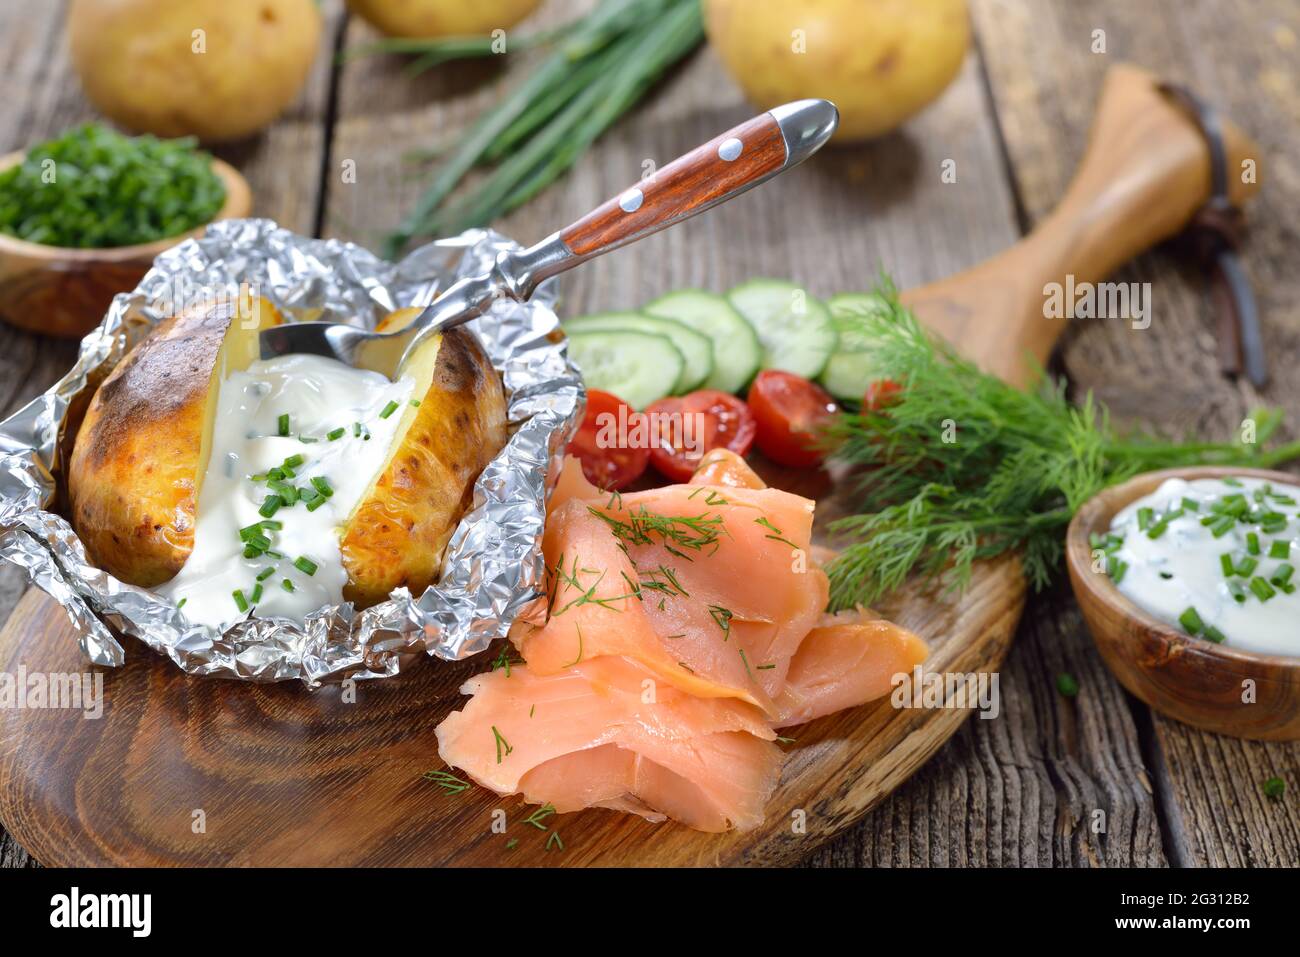 Baked jacket potato fresh from the oven served with chives sour cream and  smoked salmon Stock Photo - Alamy